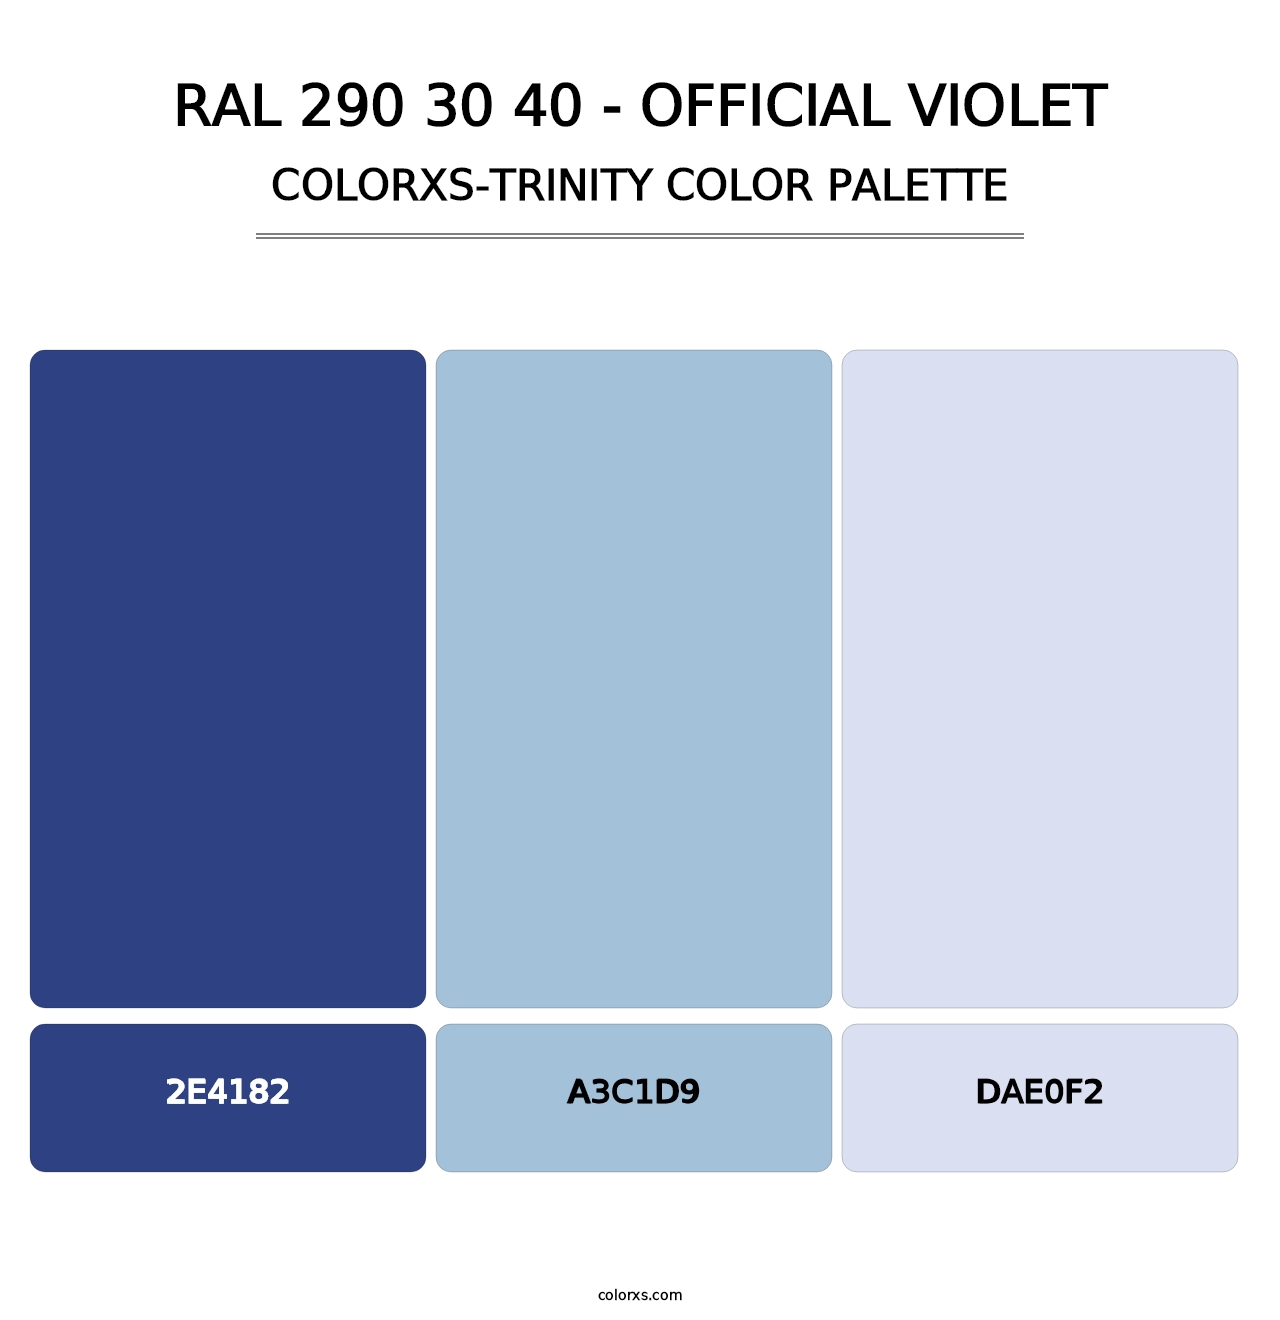 RAL 290 30 40 - Official Violet - Colorxs Trinity Palette